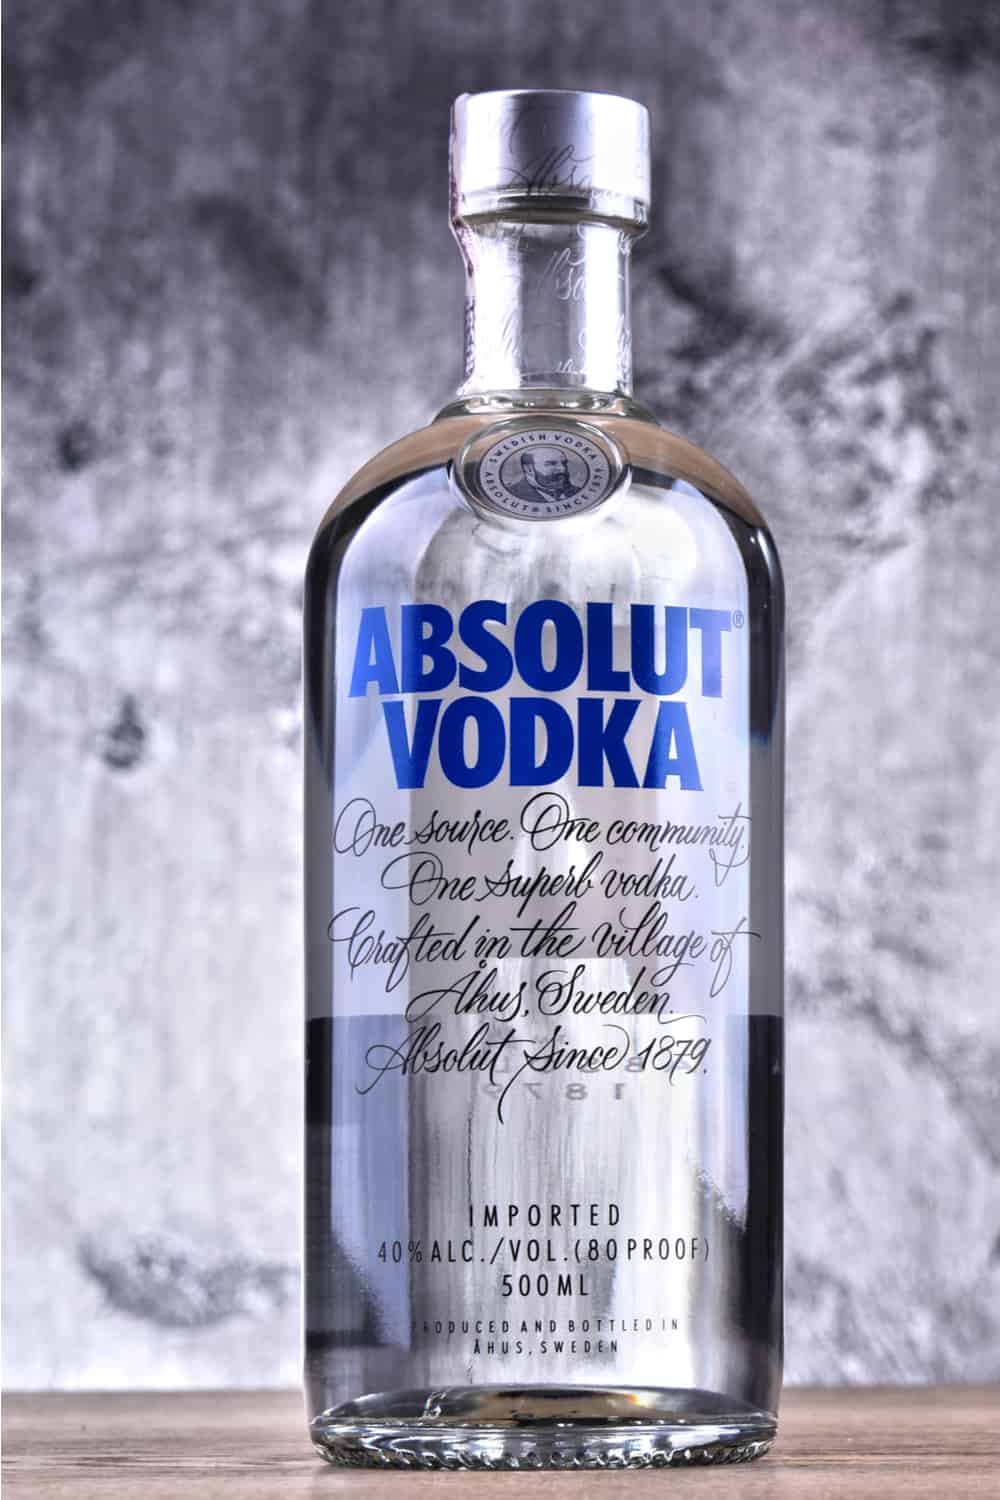 The Risk of Consuming Expired Vodka